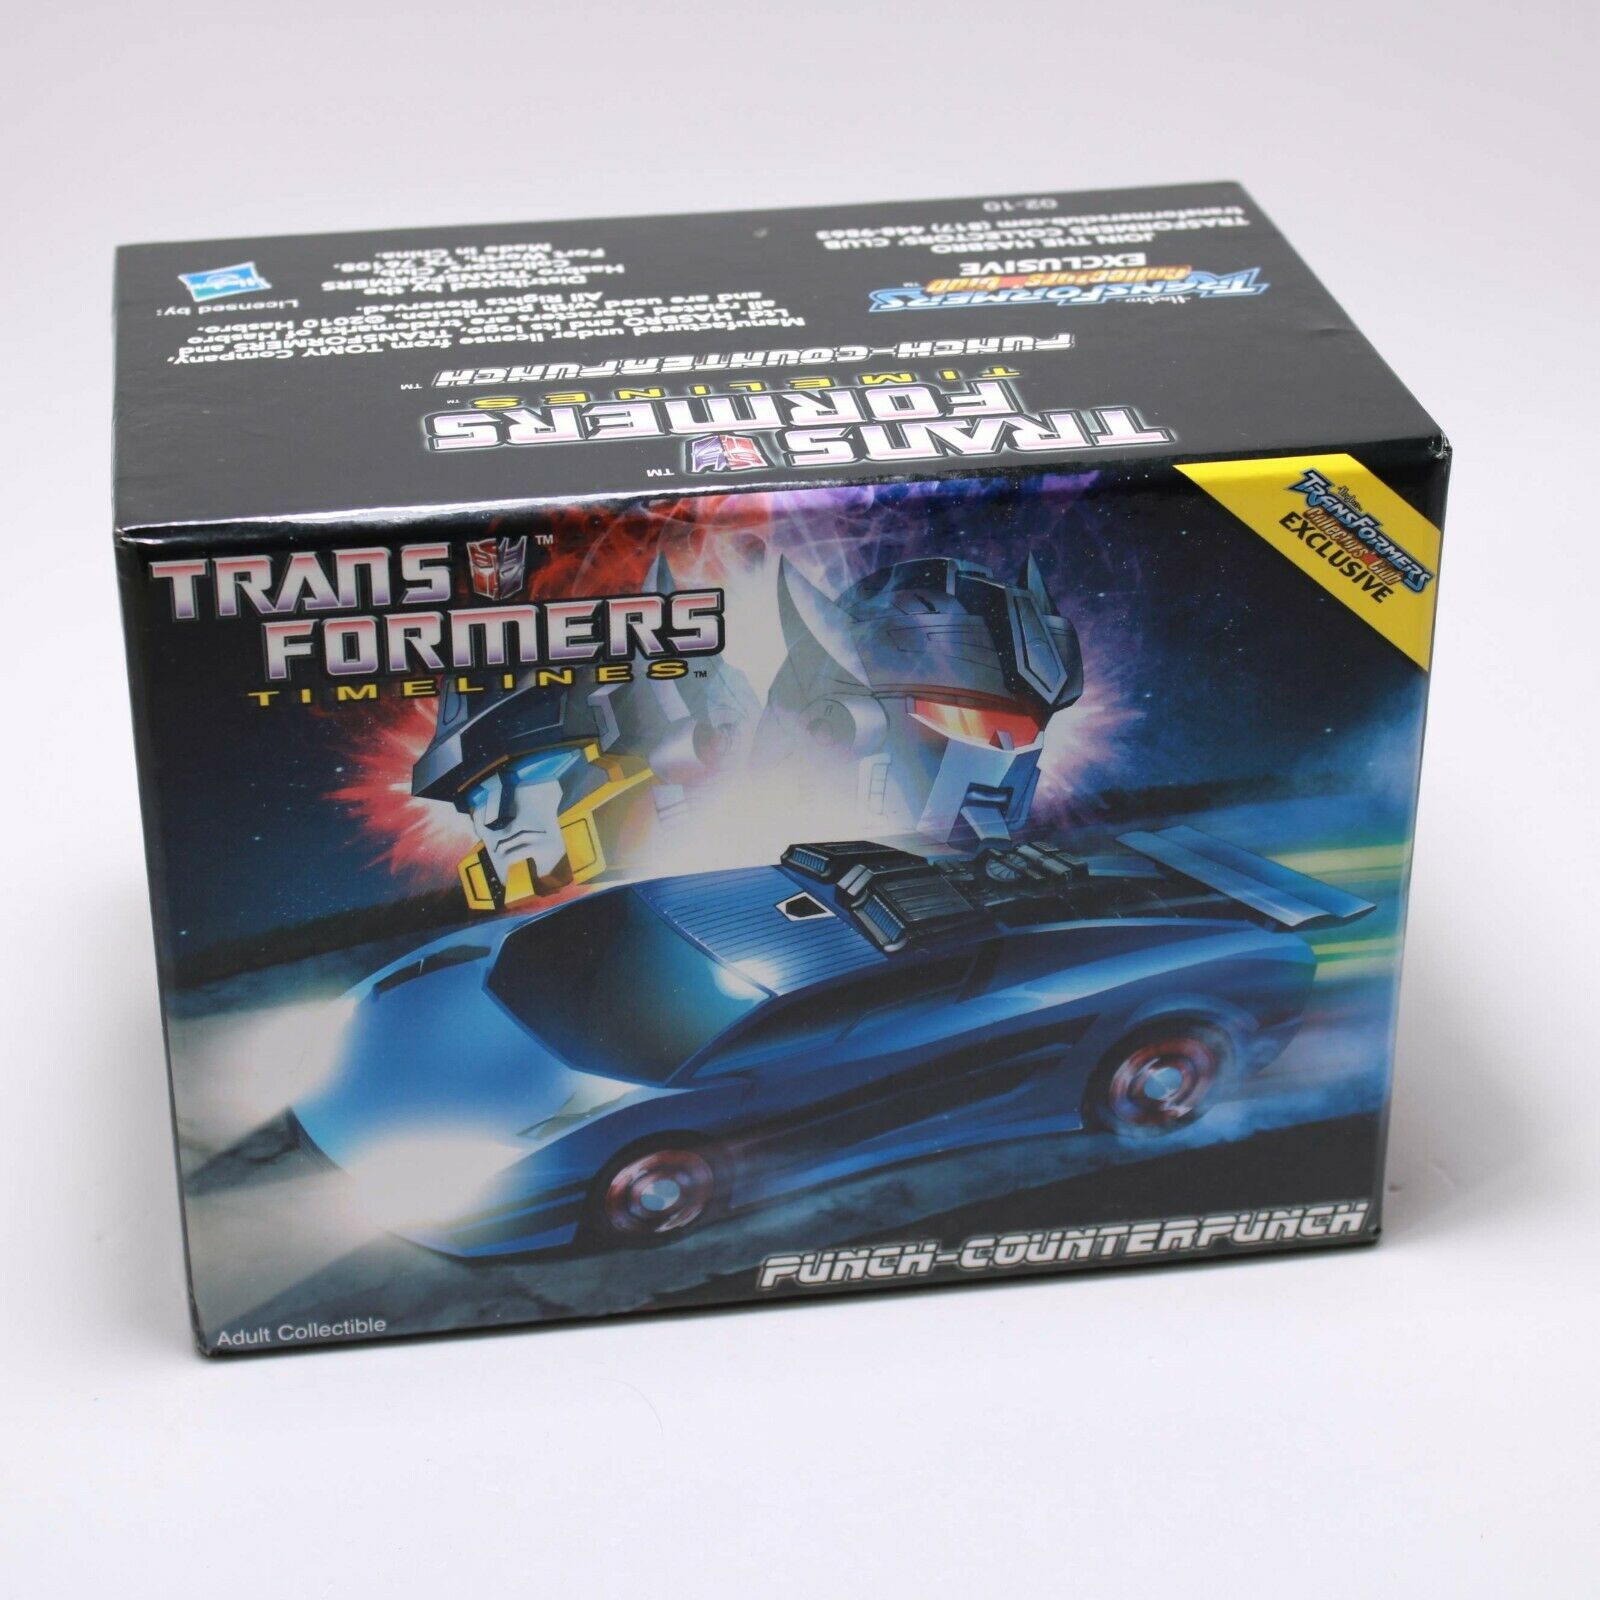 Transformers BotCon Punch / Counterpunch TFCC Club with Box 100% Complete Figure